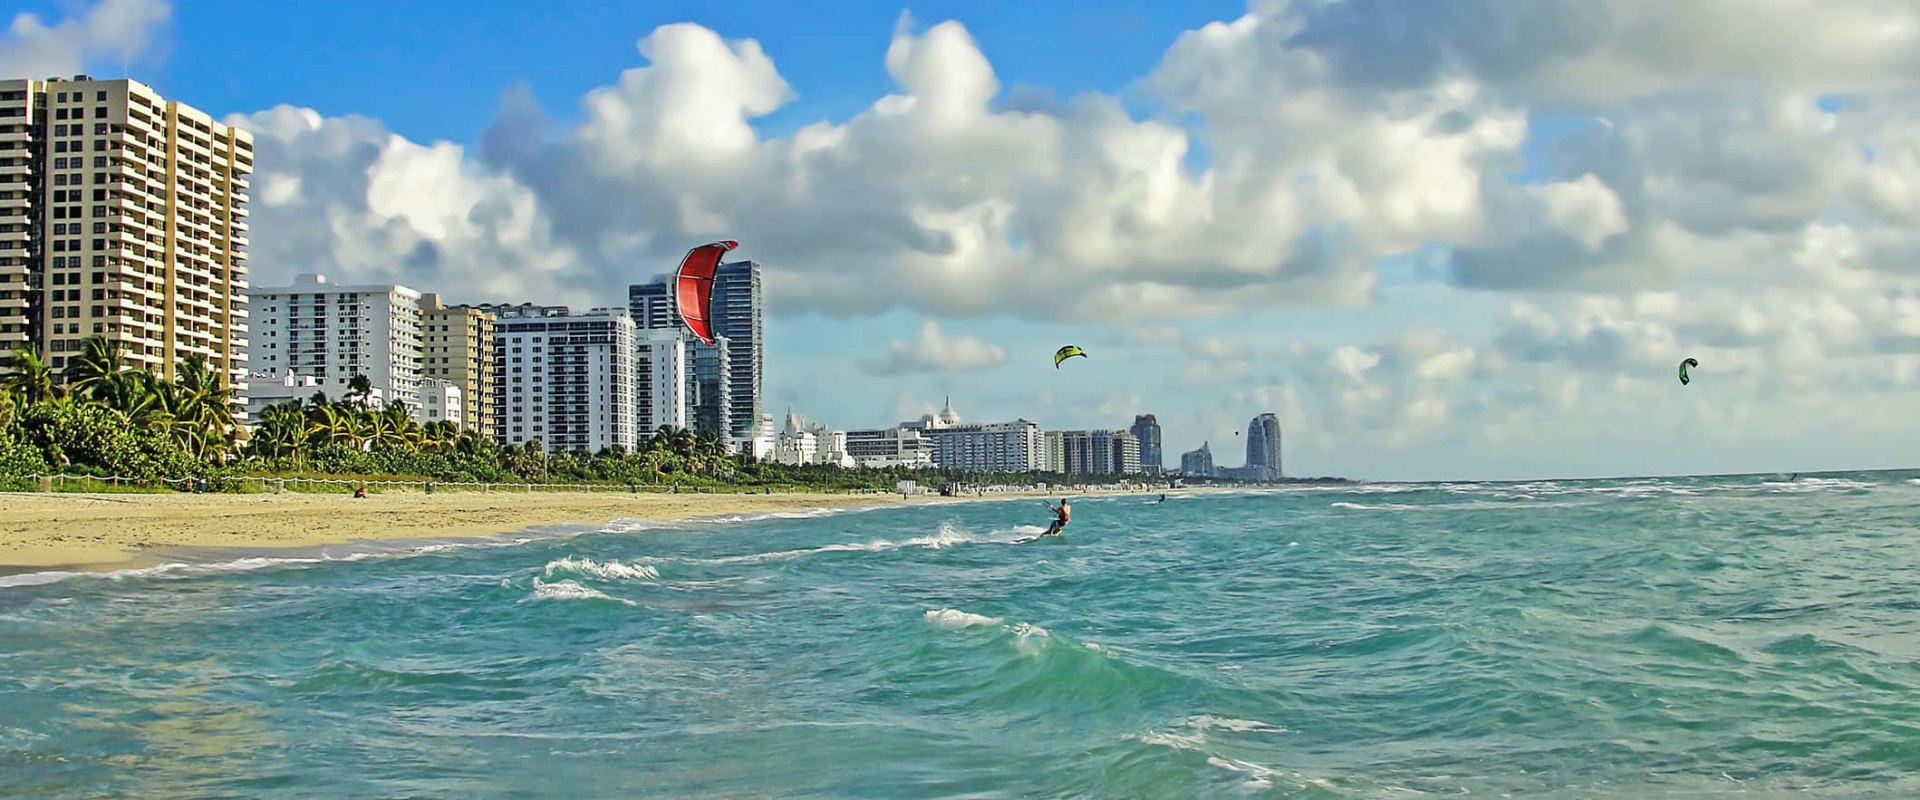 HVAC Regulations in Miami Beach, FL: What You Need to Know